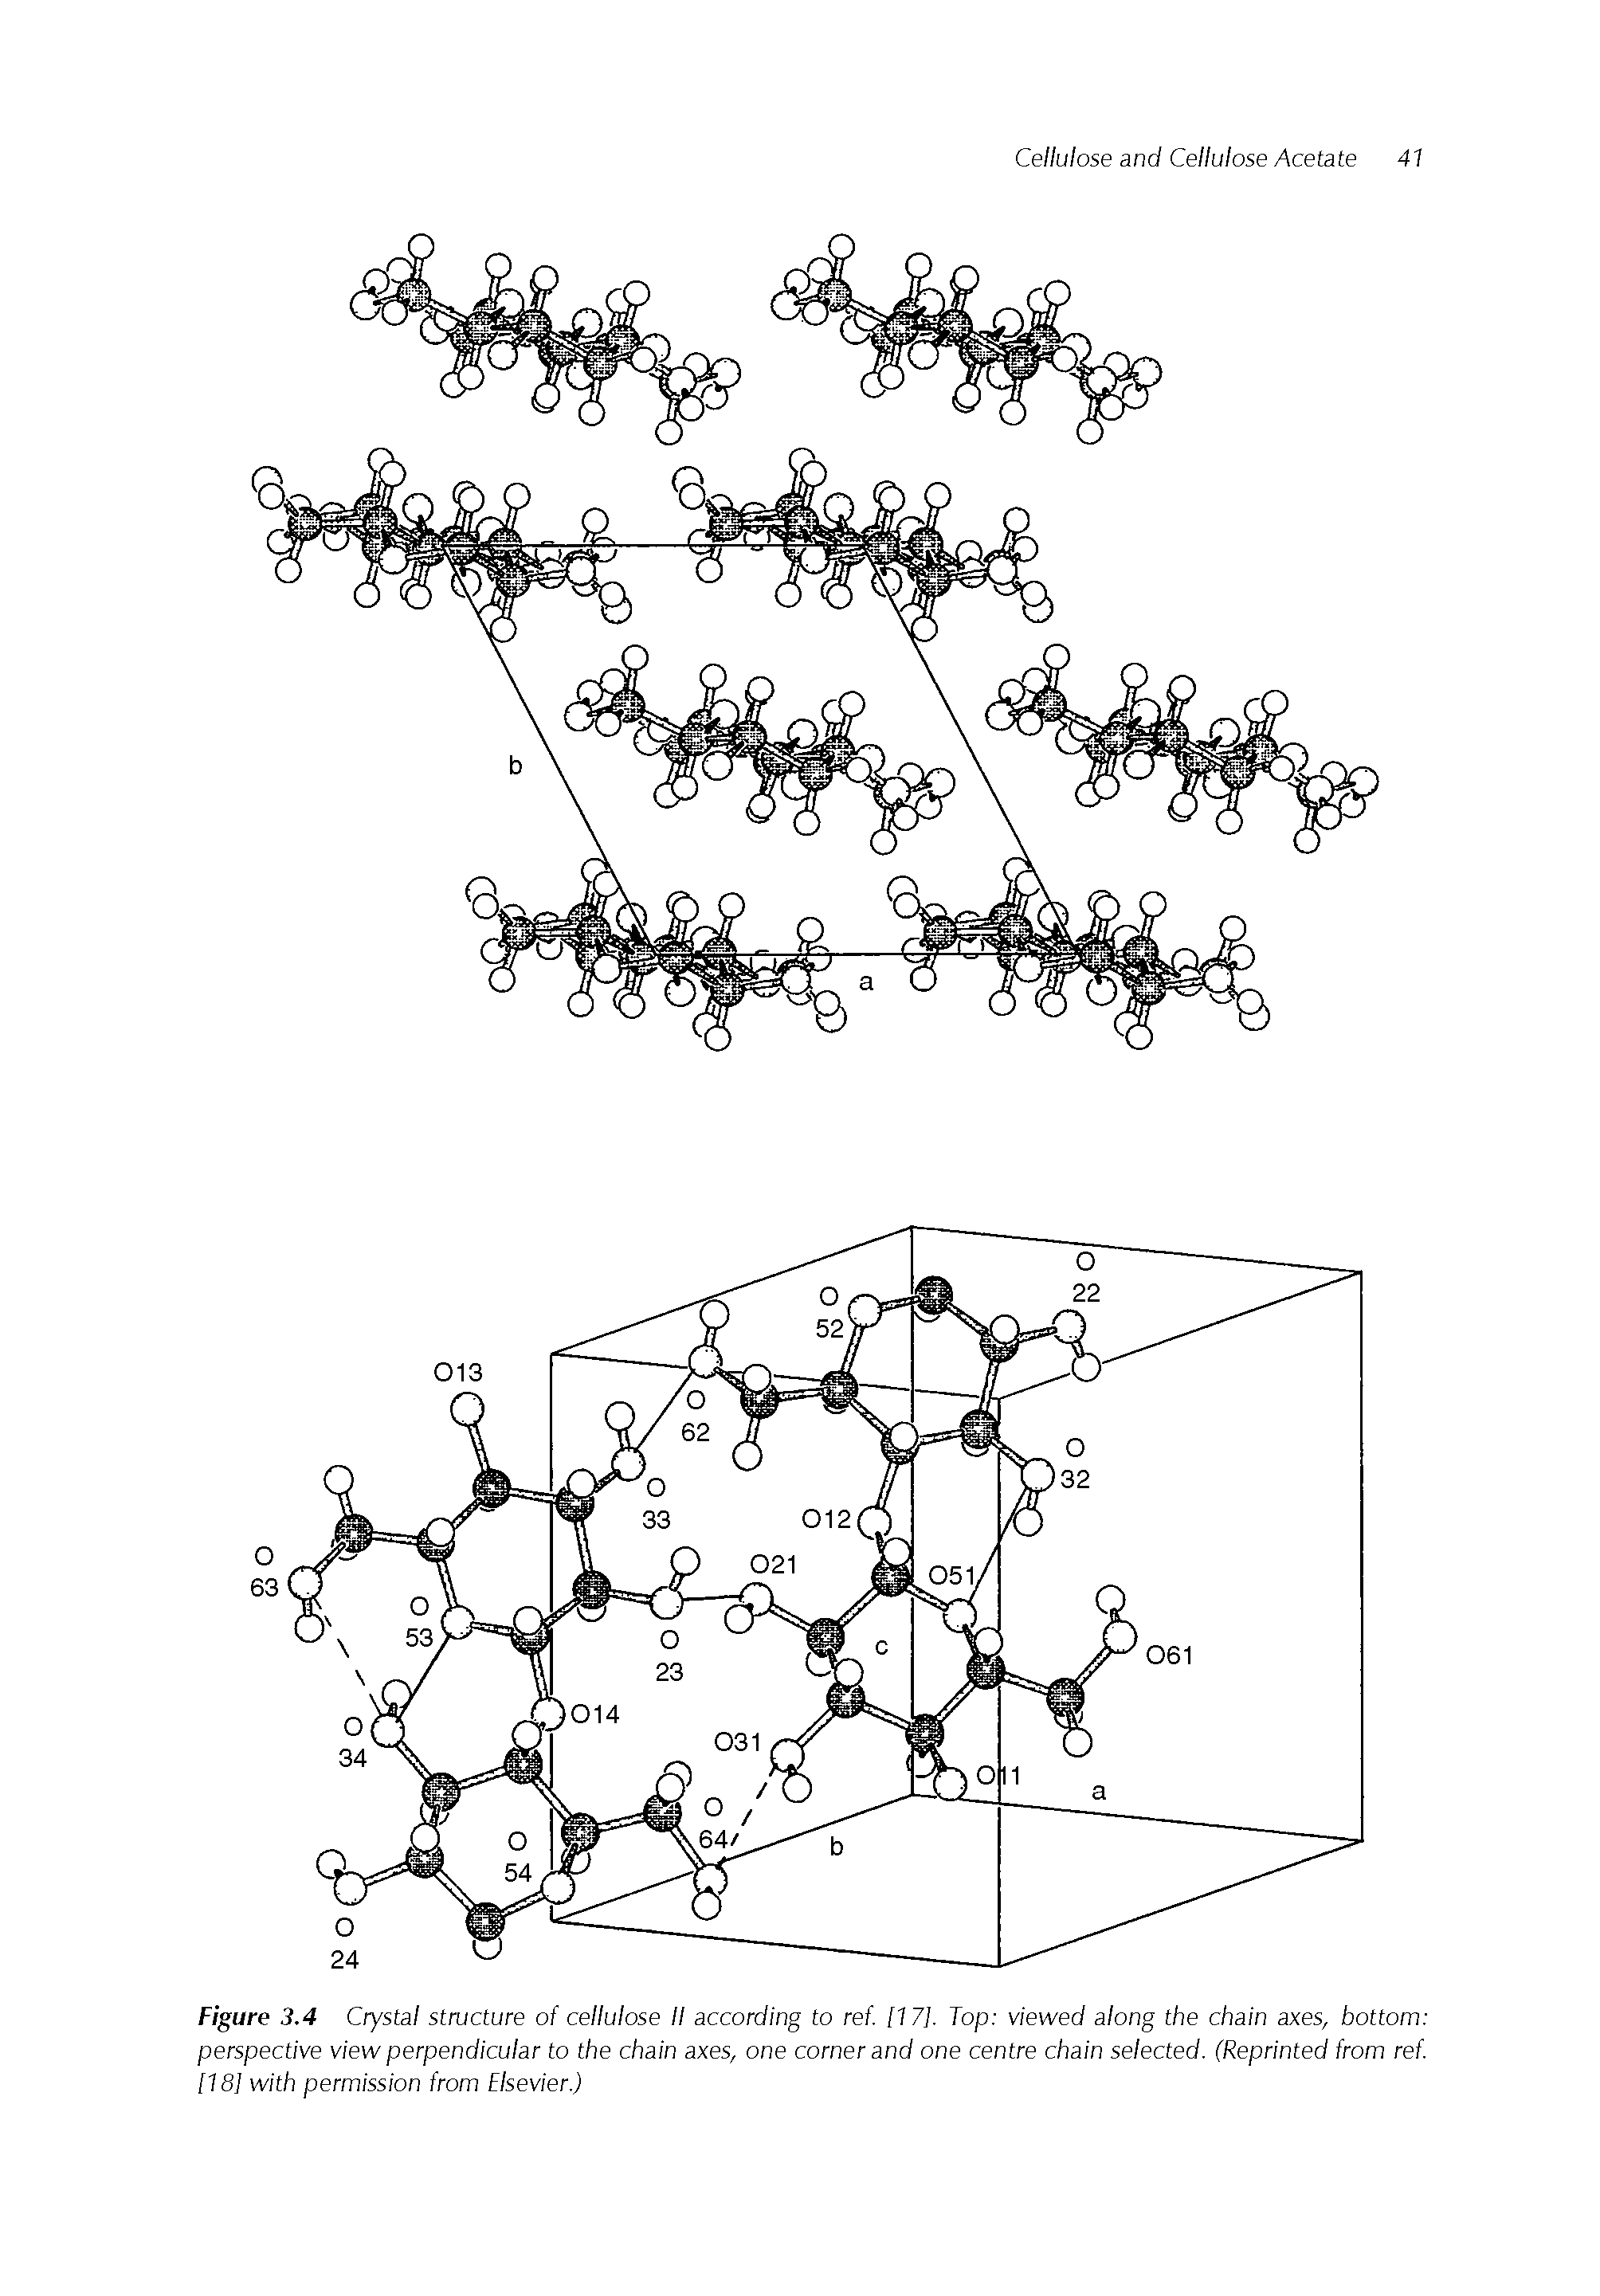 Figure 3.4 Crystal structure of cellulose II according to ref. [17], Top viewed along the chain axes, bottom perspective view perpendicular to the chain axes, one corner and one centre chain selected. (Reprinted from ref. 1181 with permission from Elsevier.)...